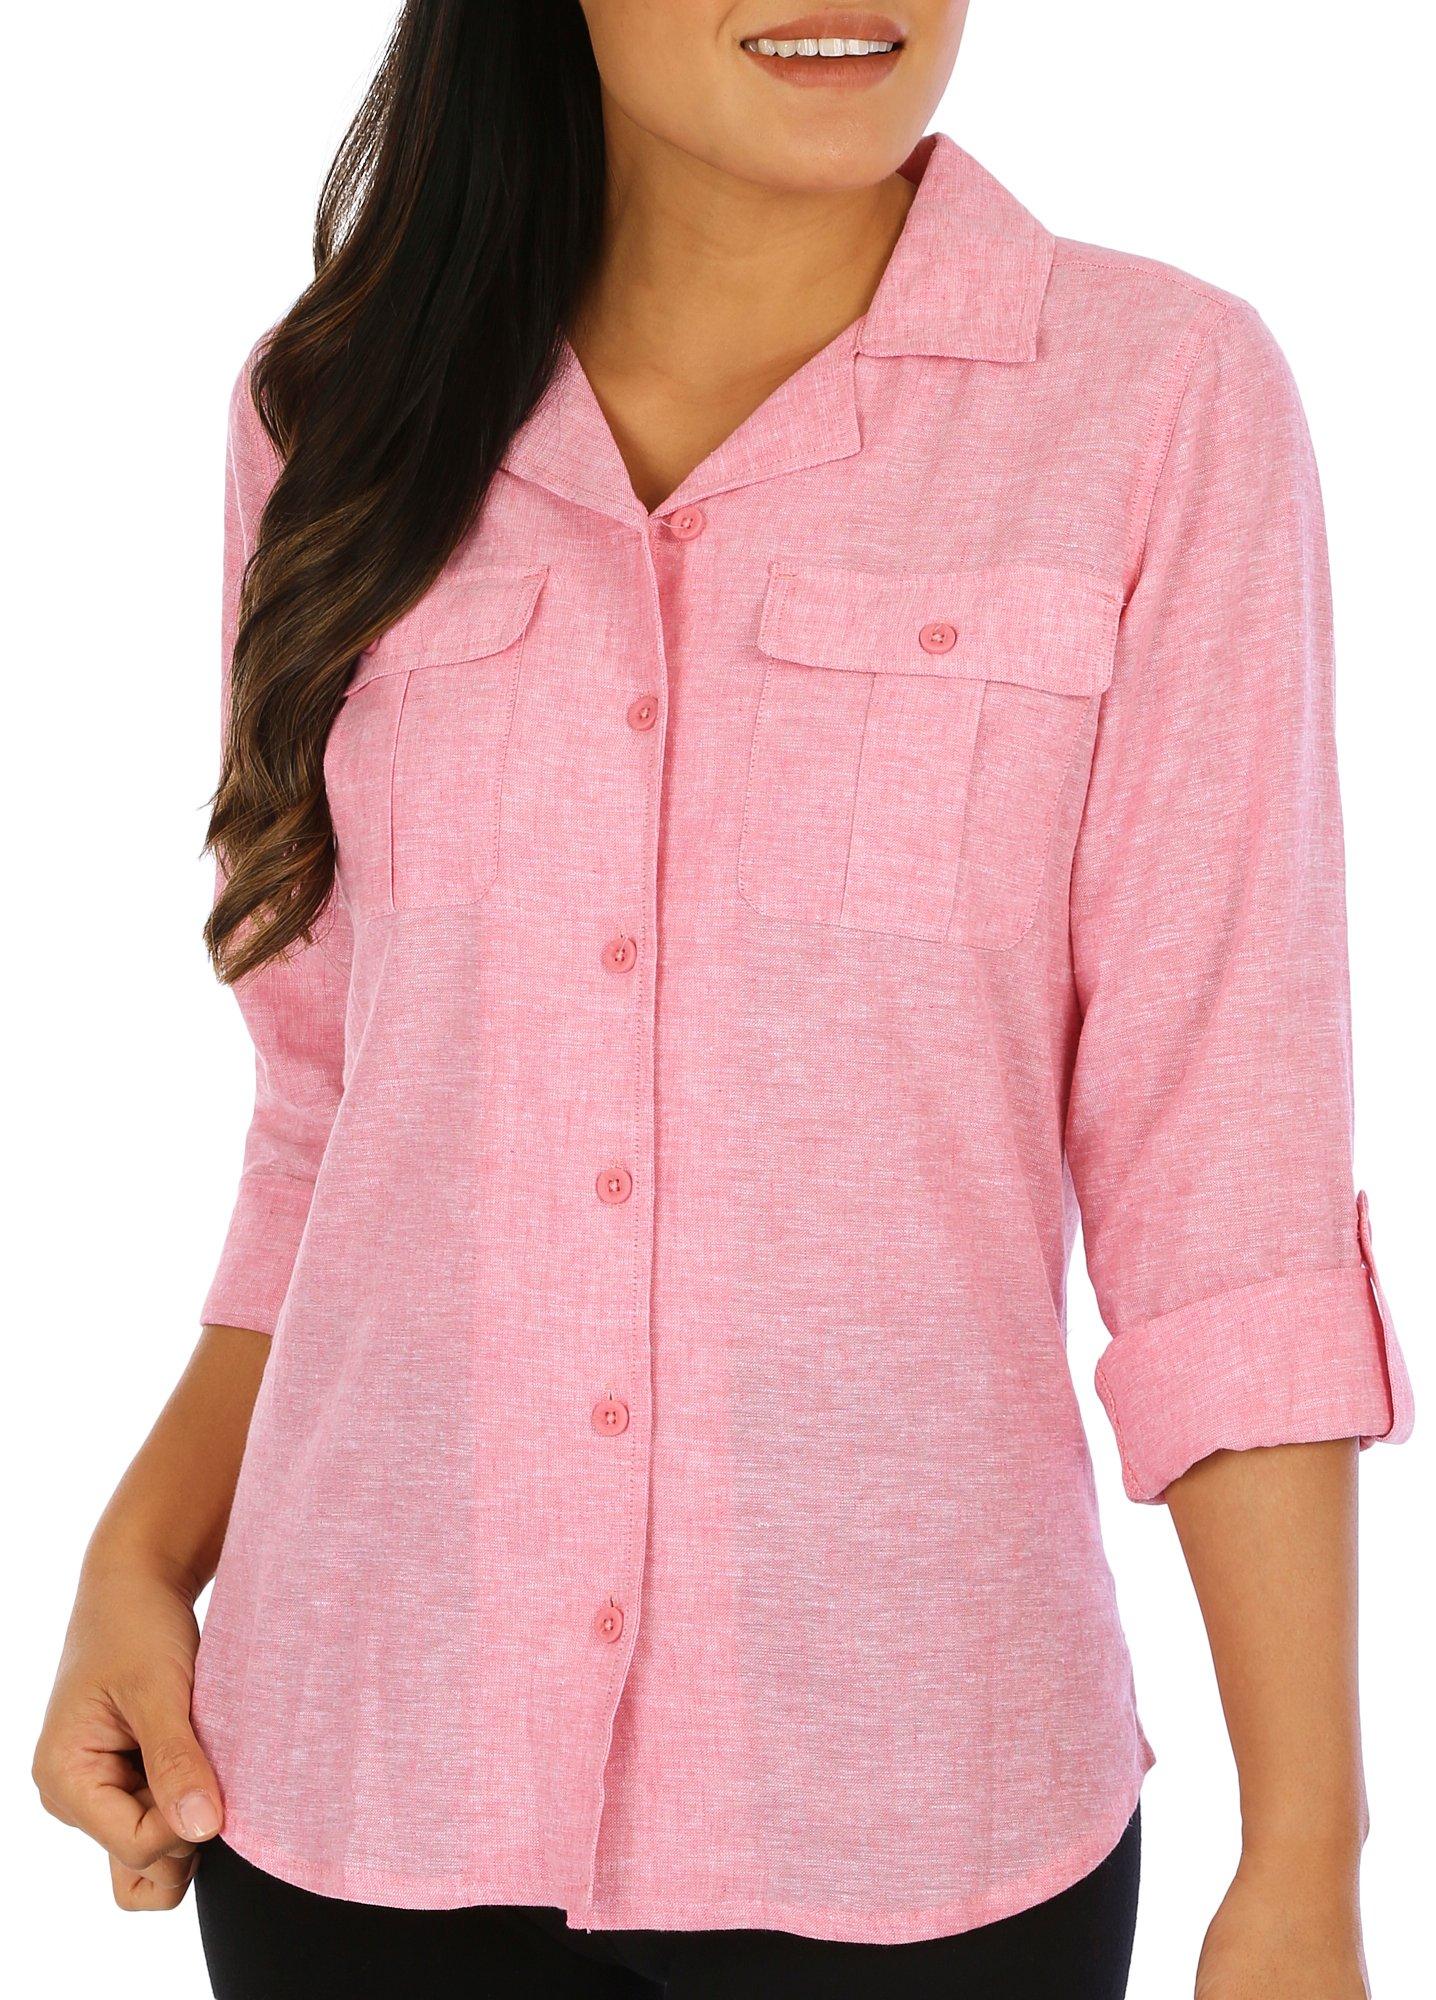 Womens Solid Cotton Linen Long Sleeve Top - Pink - Large